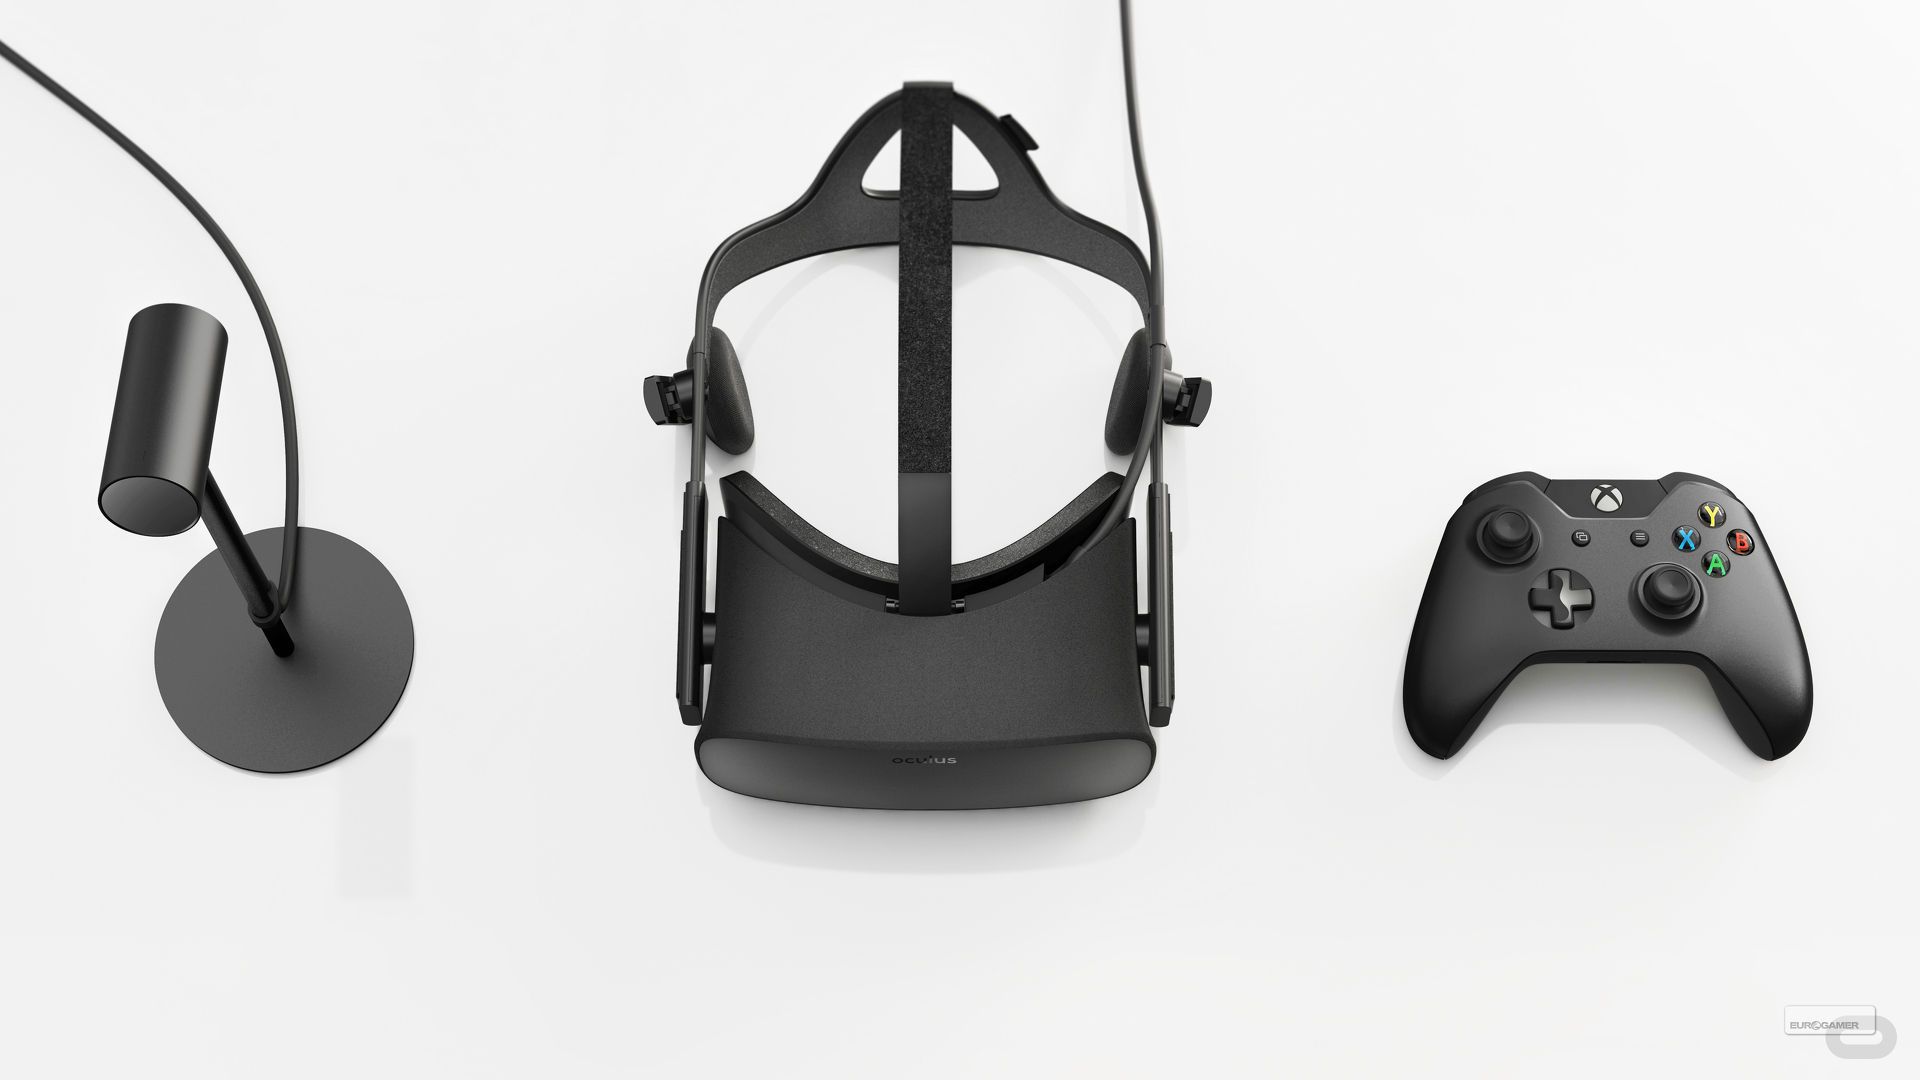 Oculus Rift Consumer Version Bundle with Xbox One controller